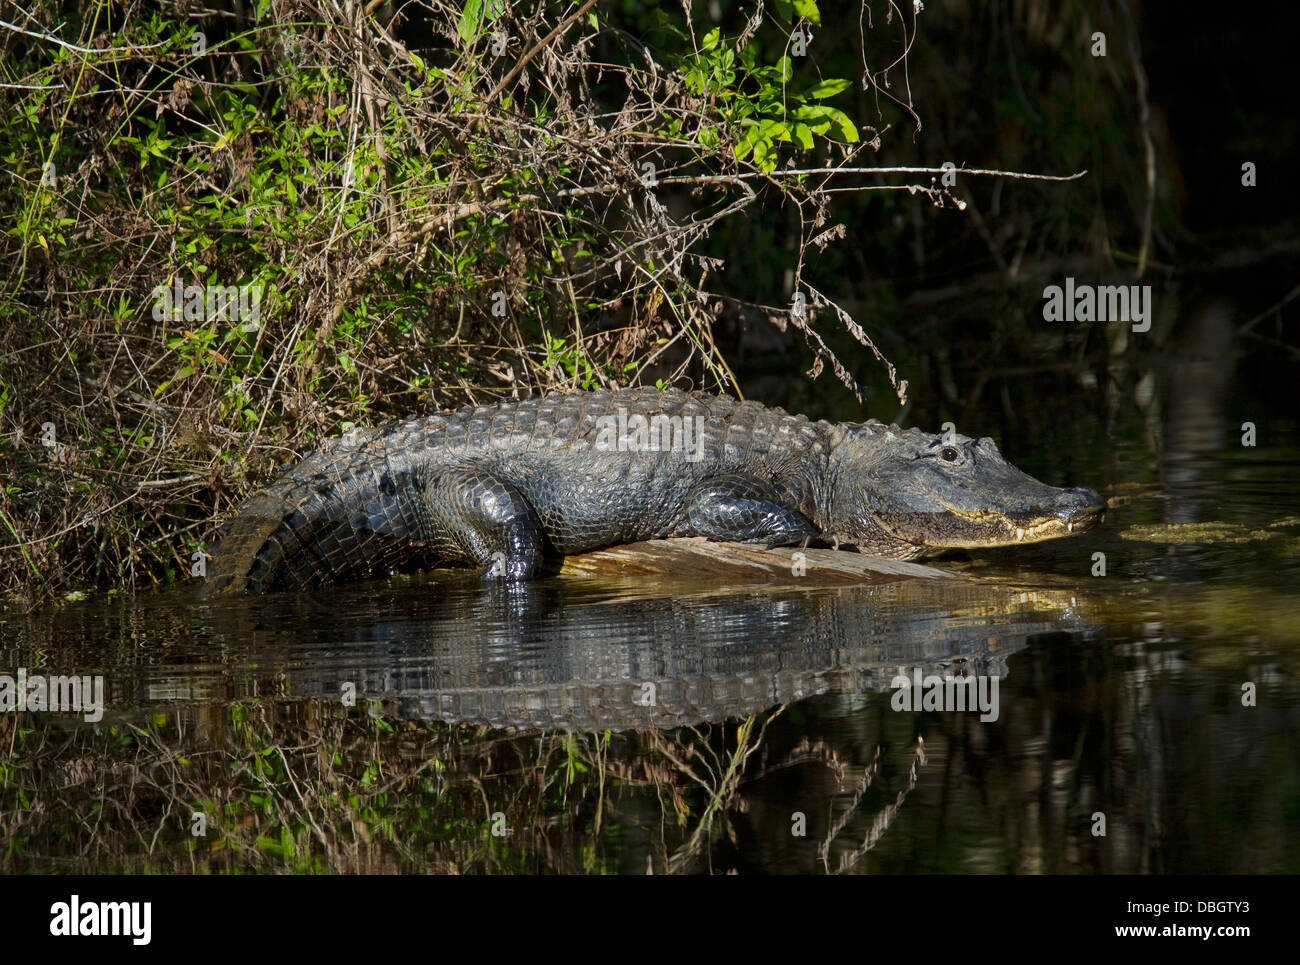 AMERICAN ALLIGATOR (Alligator mississippiensis) Six Mile Cypress Slough Preserve, Fort Myers, Florida, USA. Stock Photo